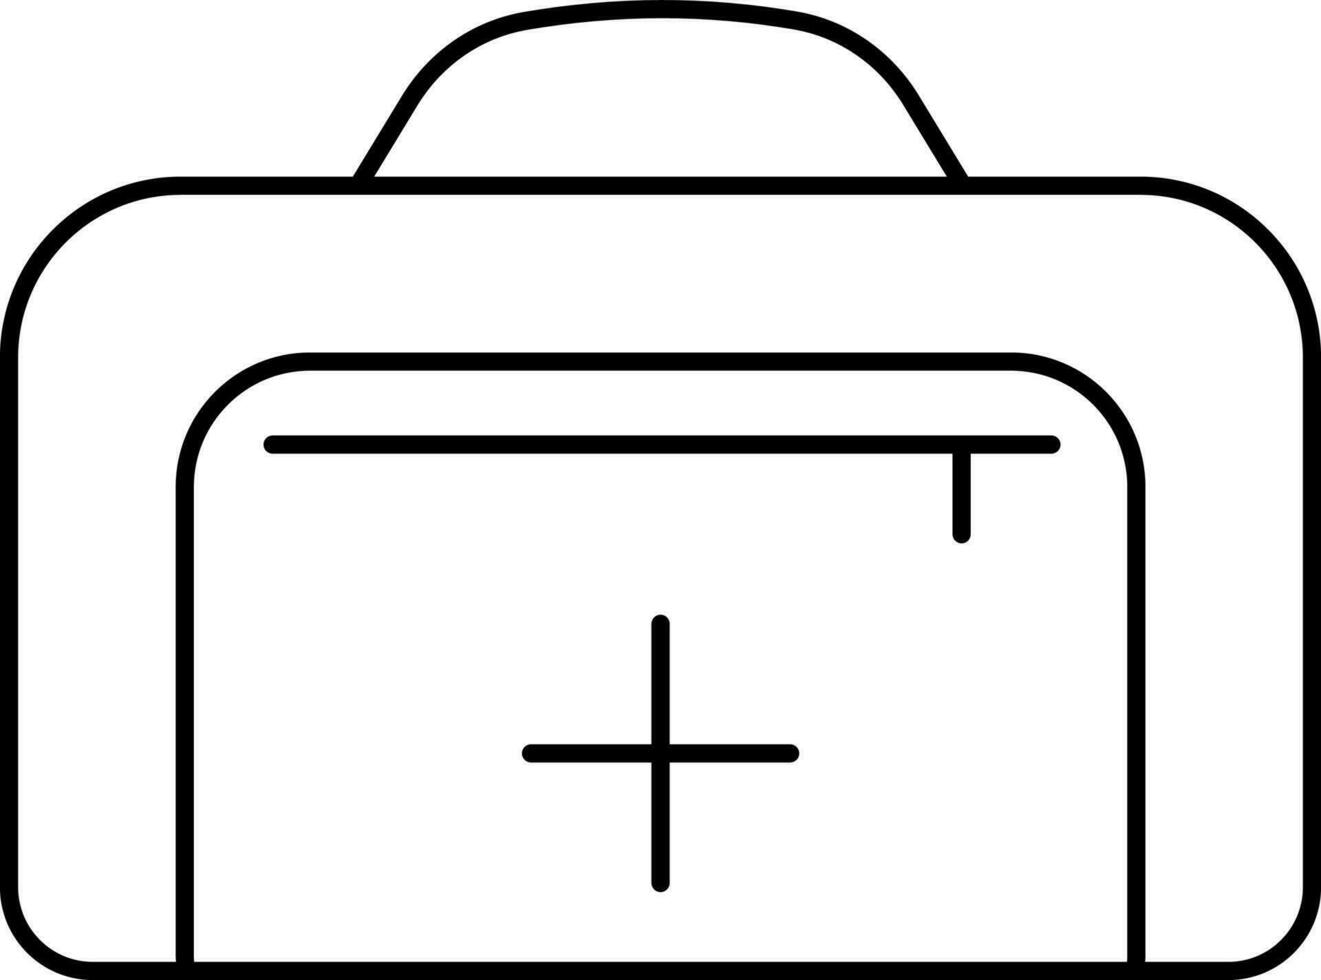 First Aid Kit Or Handbag Icon In Thin Line Art. vector